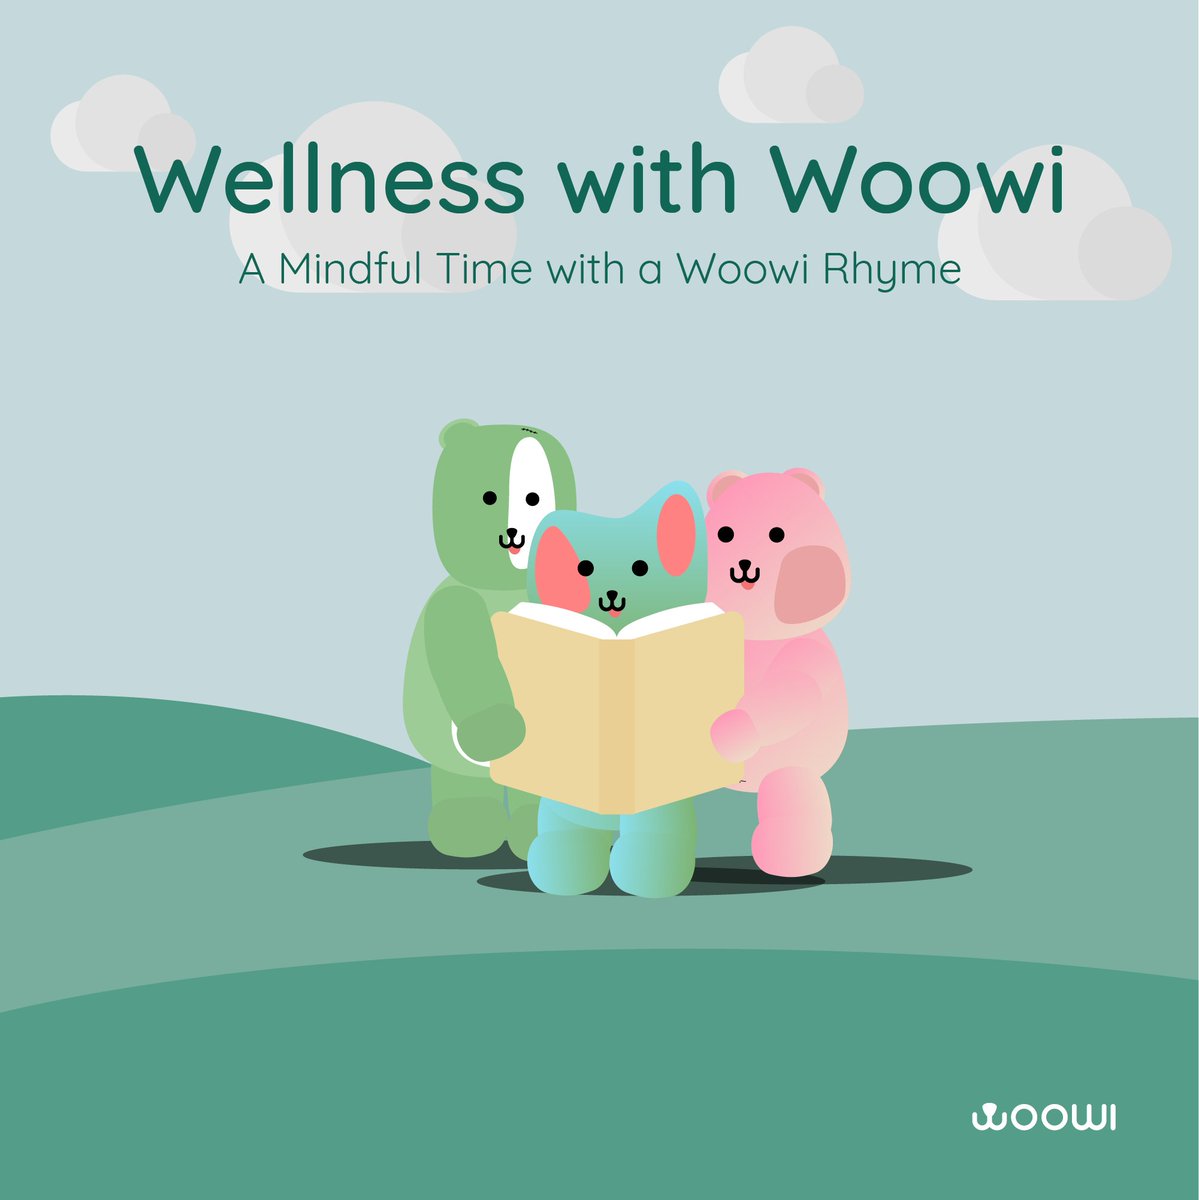 Our books are here to support you/your child/ren to discover mindfulness. ✌✌✌

Available via our website - woowi.co.uk 

#positivementalhealth #mindfulnesspractice #mindfulnessforkids #wellbeing #wellnessjourney #mindfulliving #mindfulnessbooks #woowi